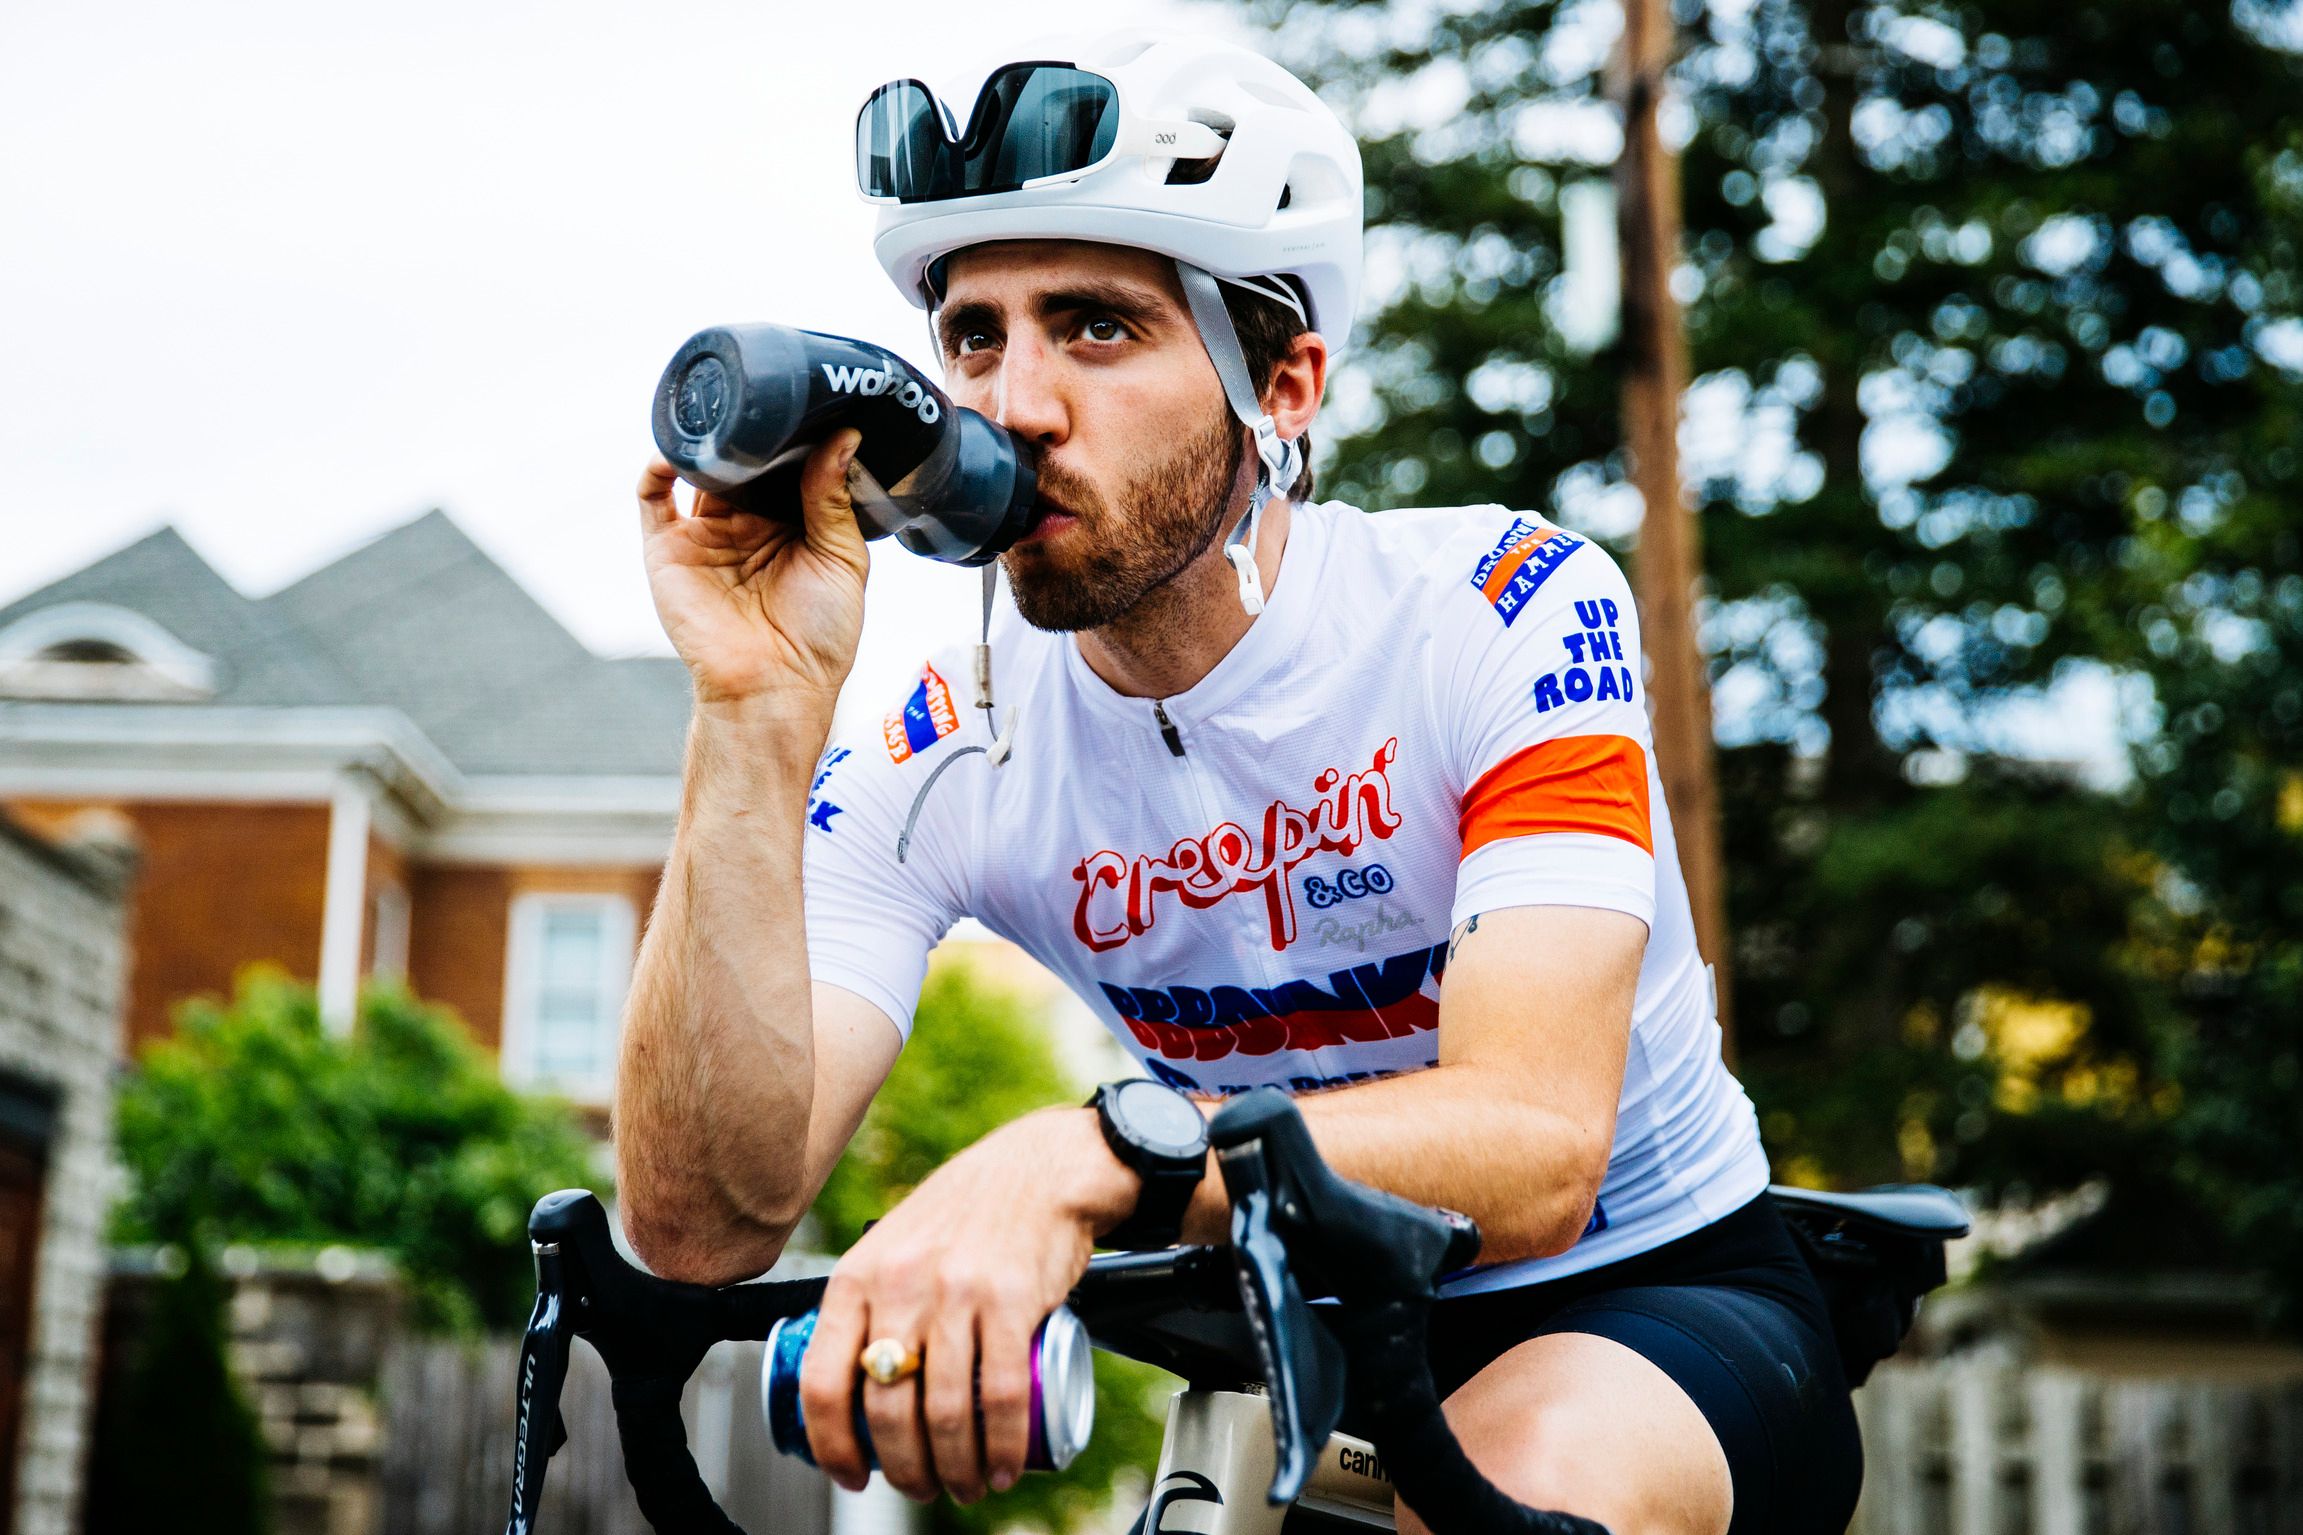 Hydration for cycling workouts